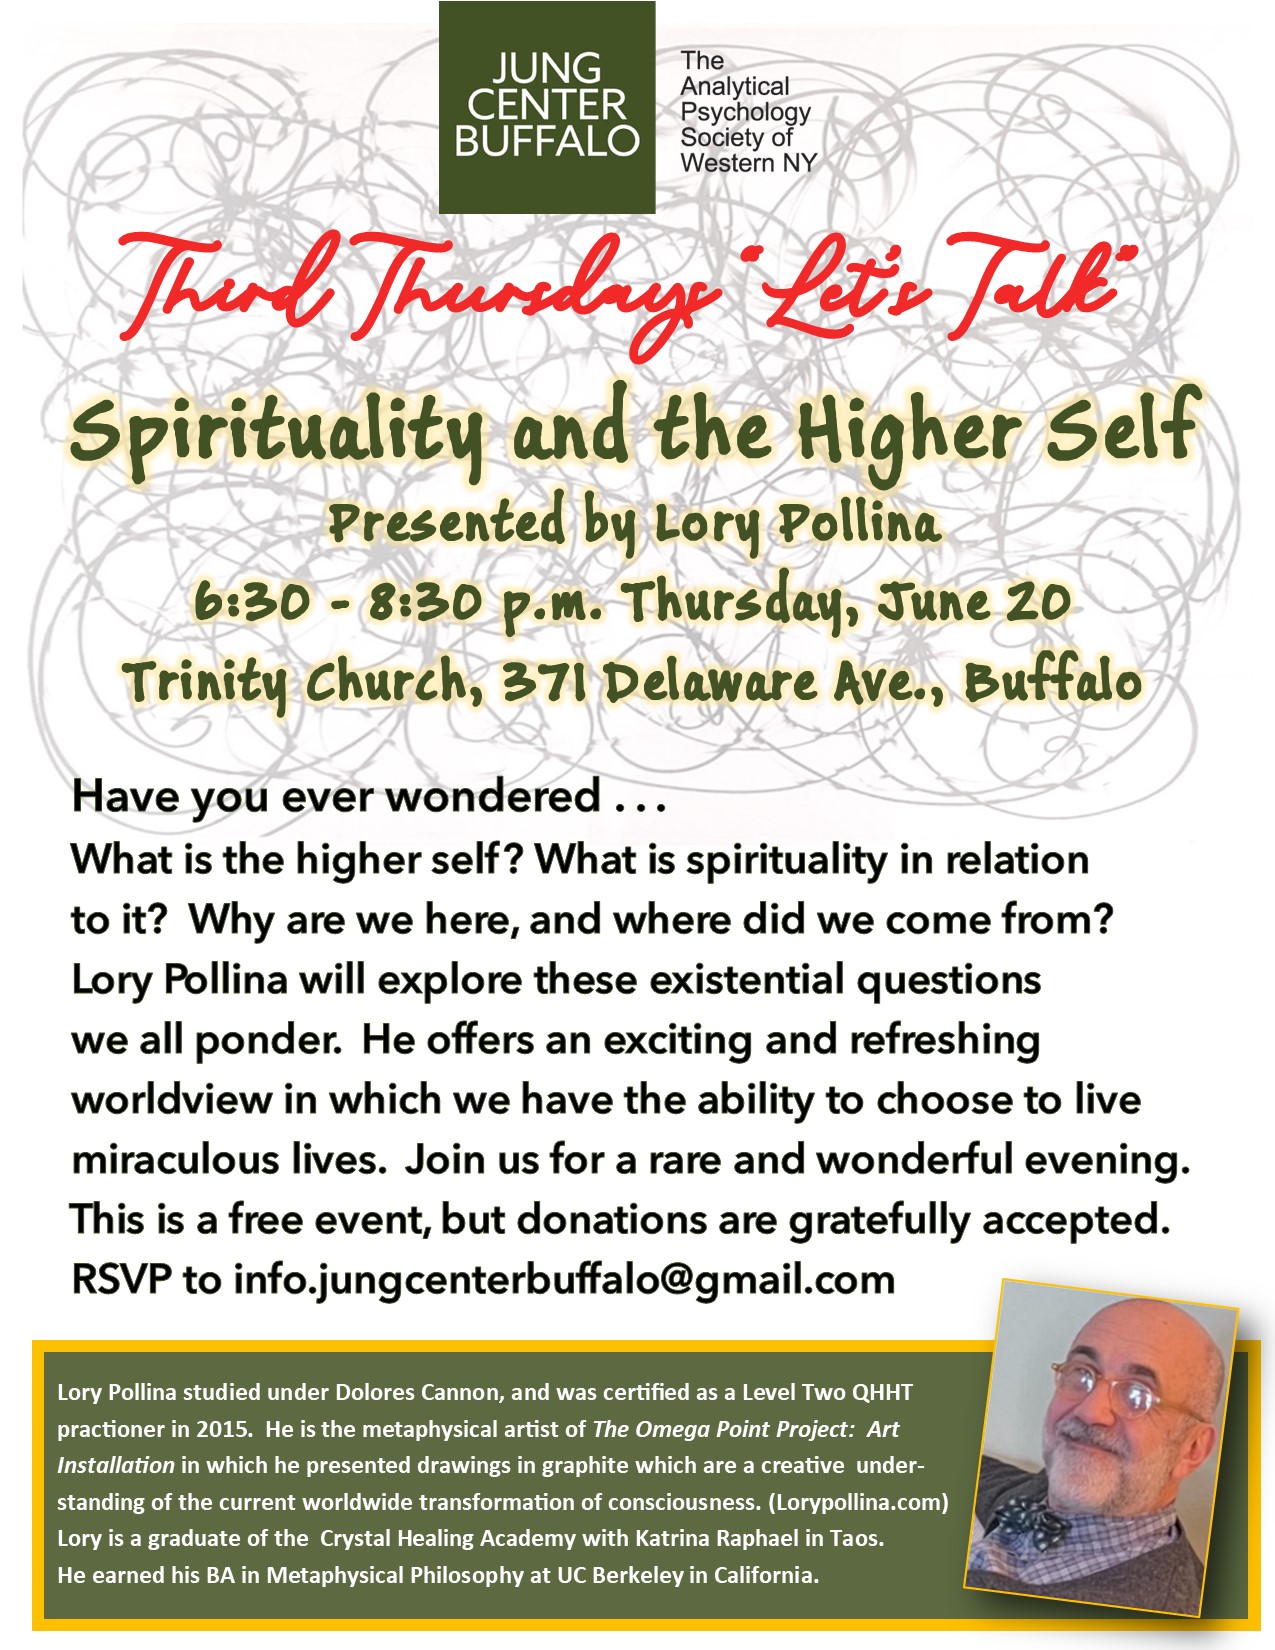 THIRD THURSDAYS "Let's Talk" Spirituality and the Higher Self Image